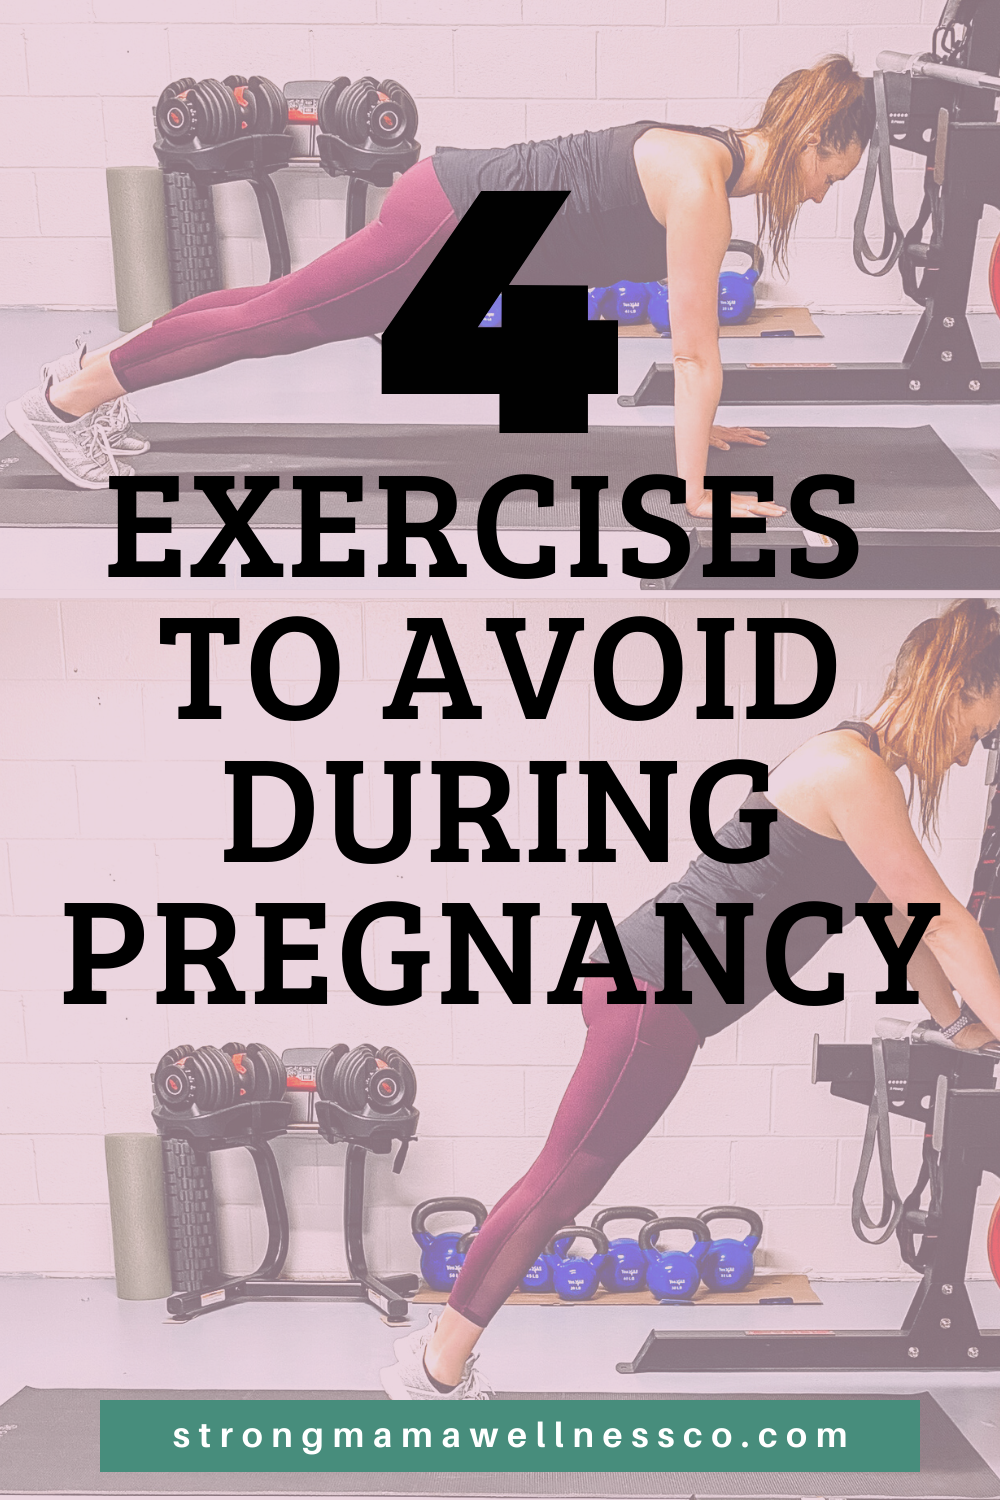 Exercise During Pregnancy: What Exercise is Safe and What to Avoid